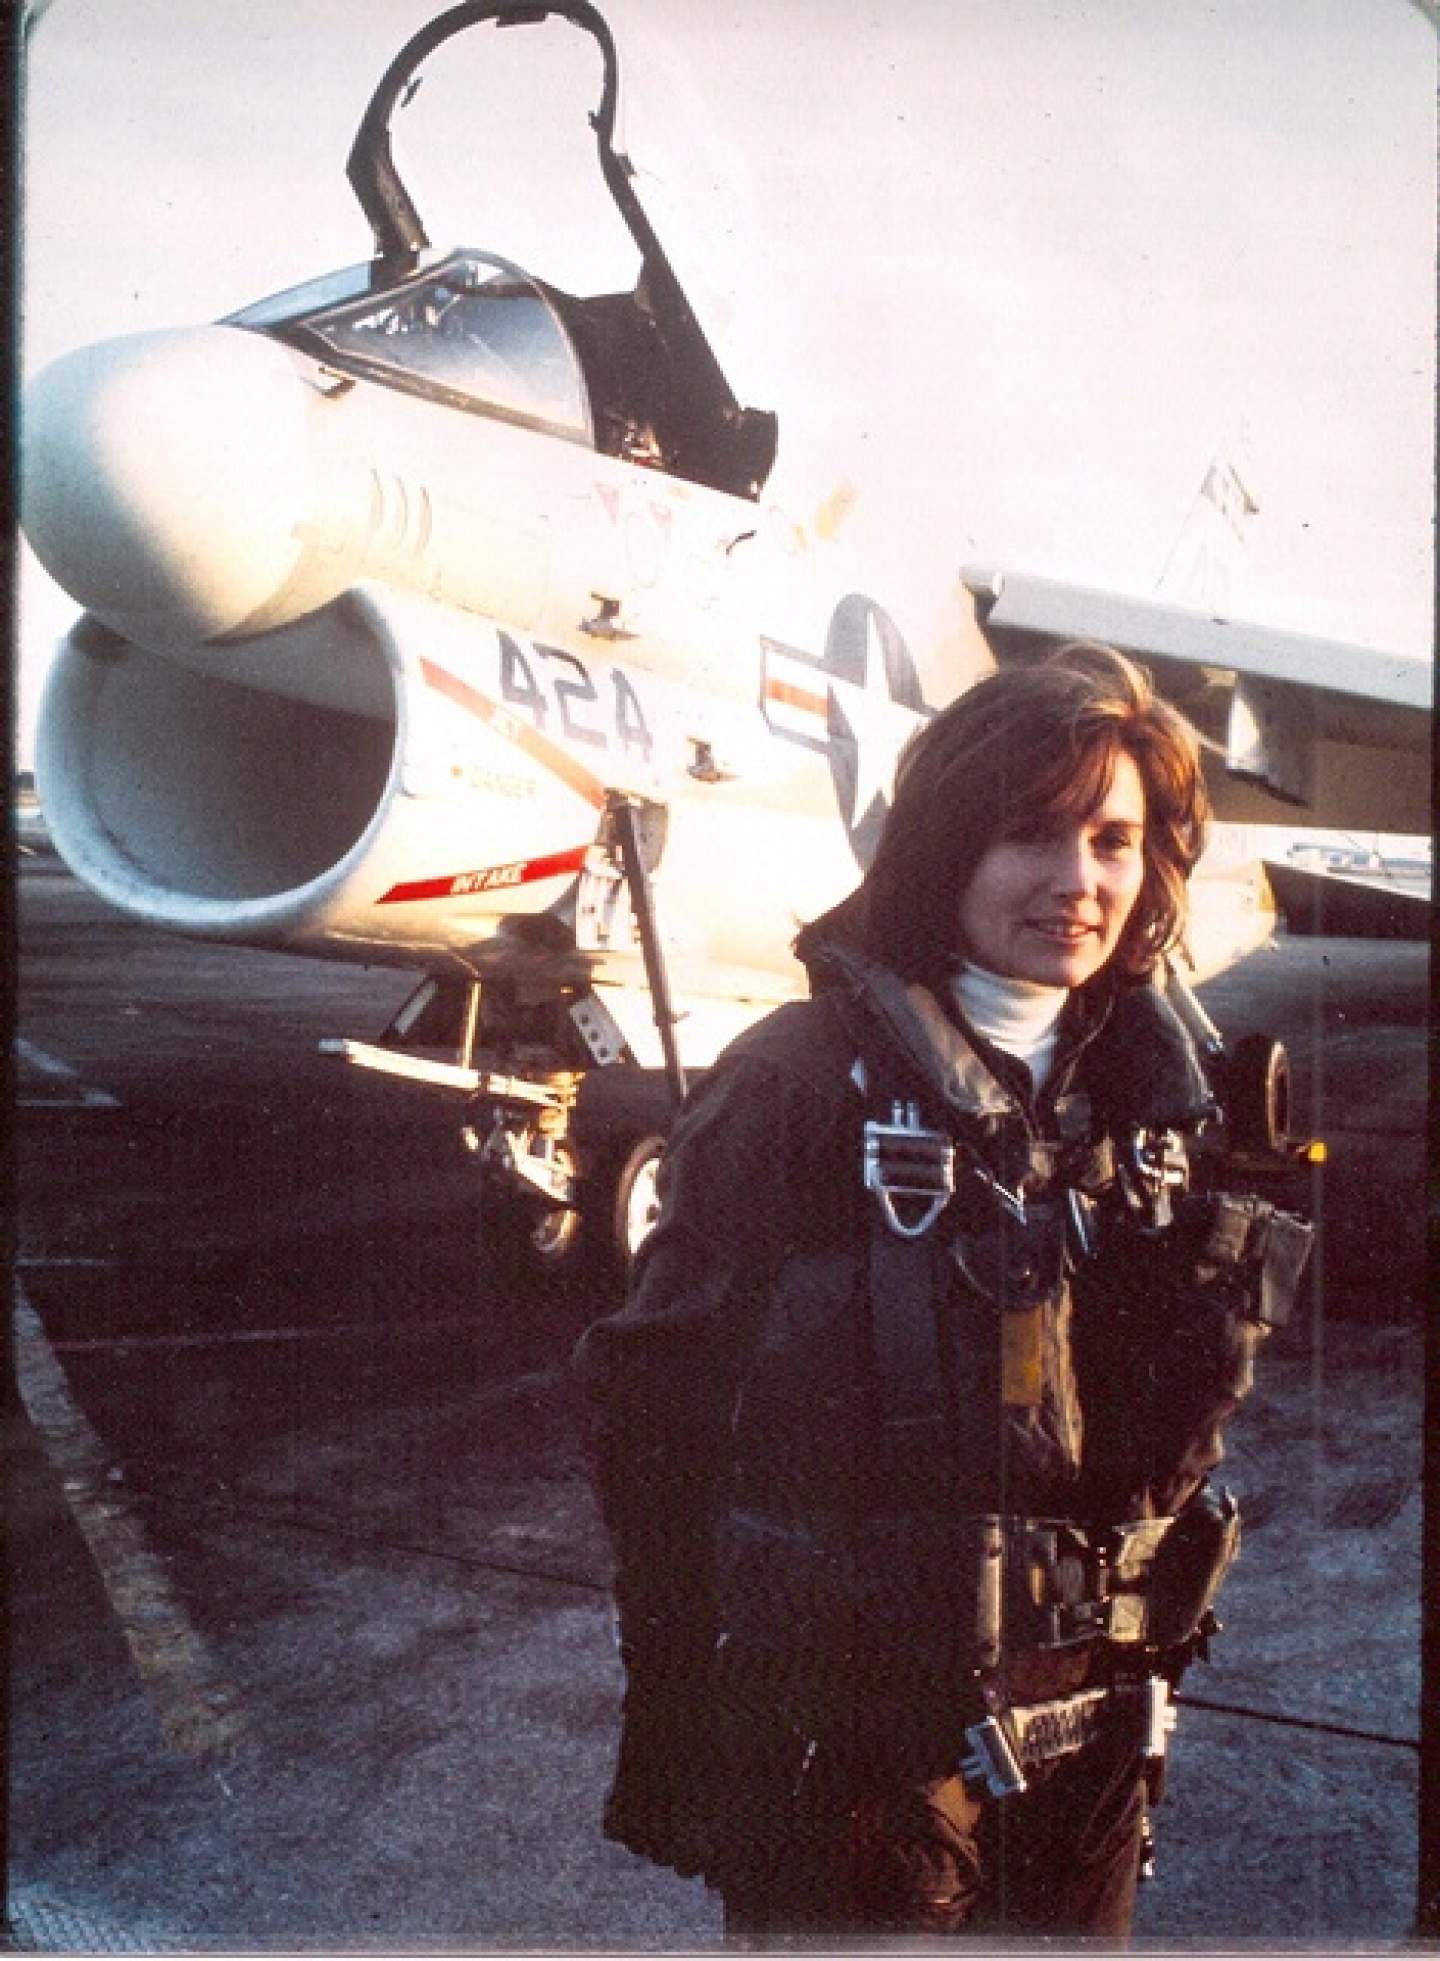 In 1976 during training for an A7 aircraft